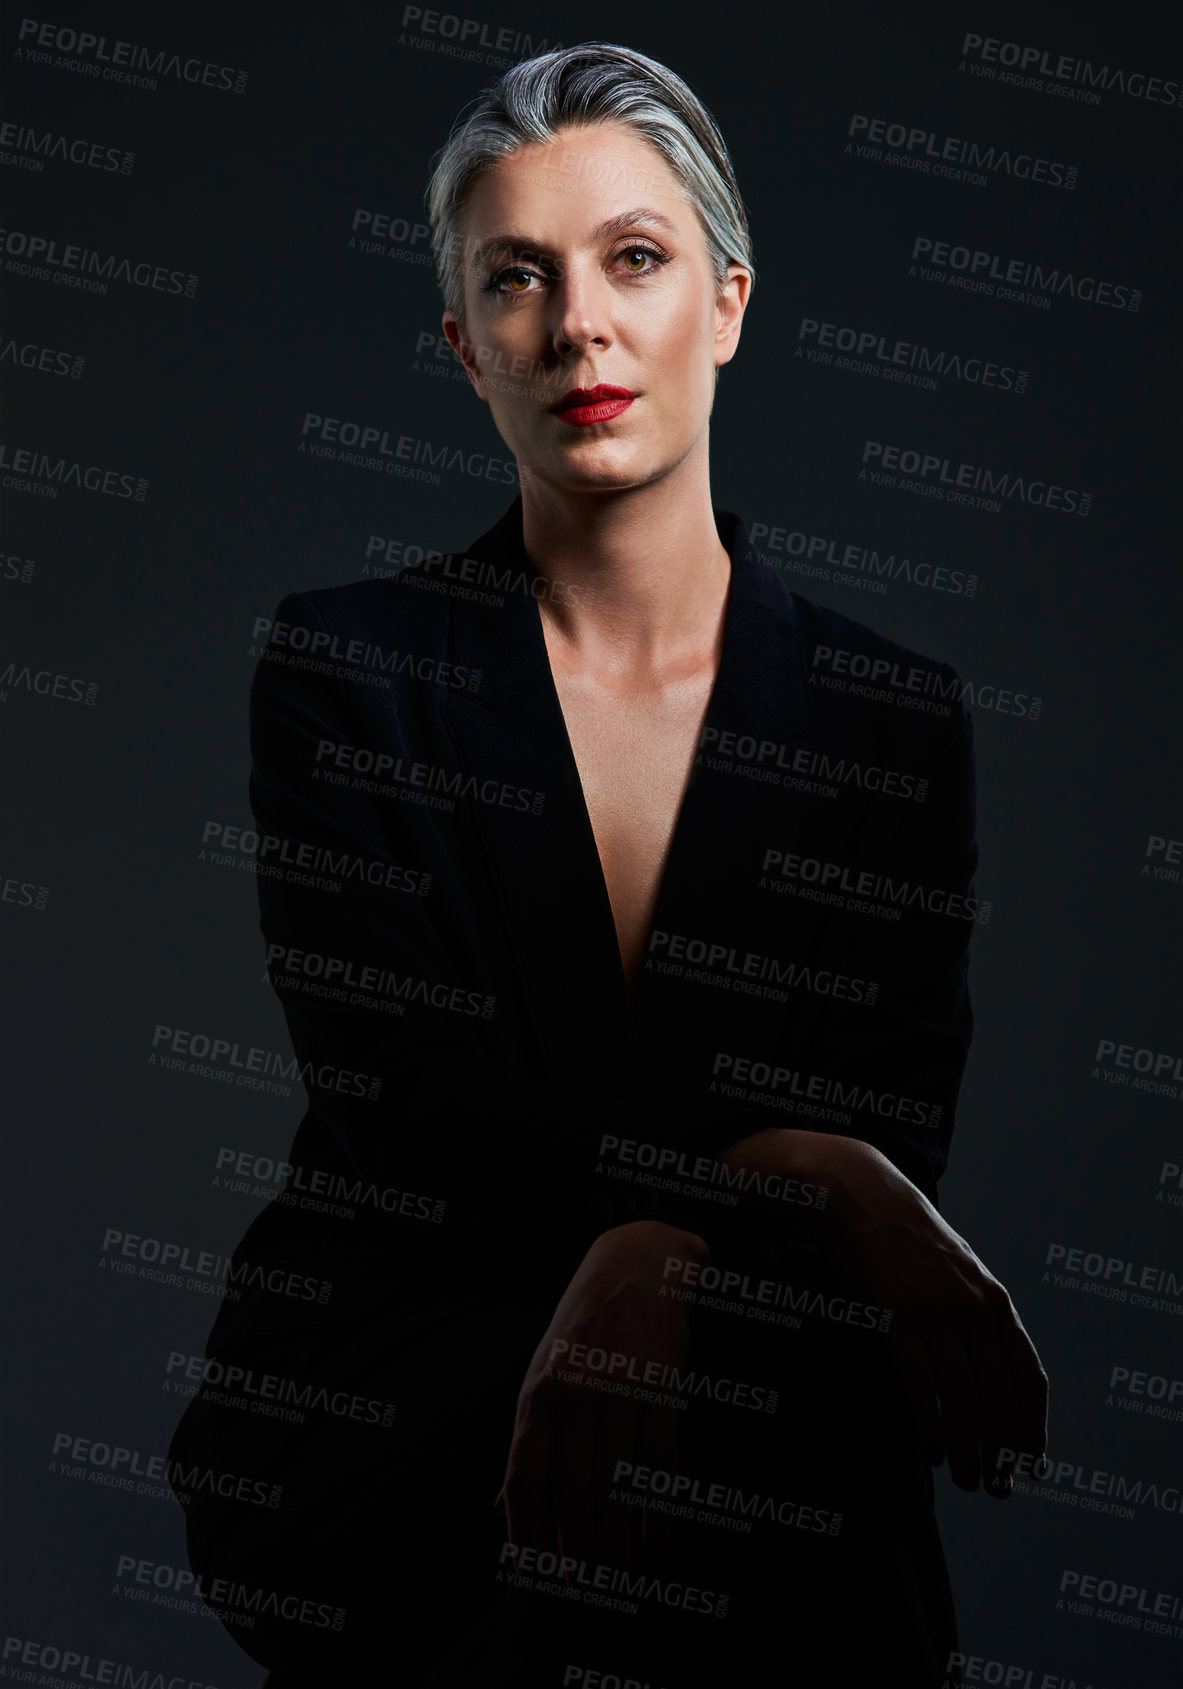 Buy stock photo Studio portrait of a beautiful mature woman posing against a dark background